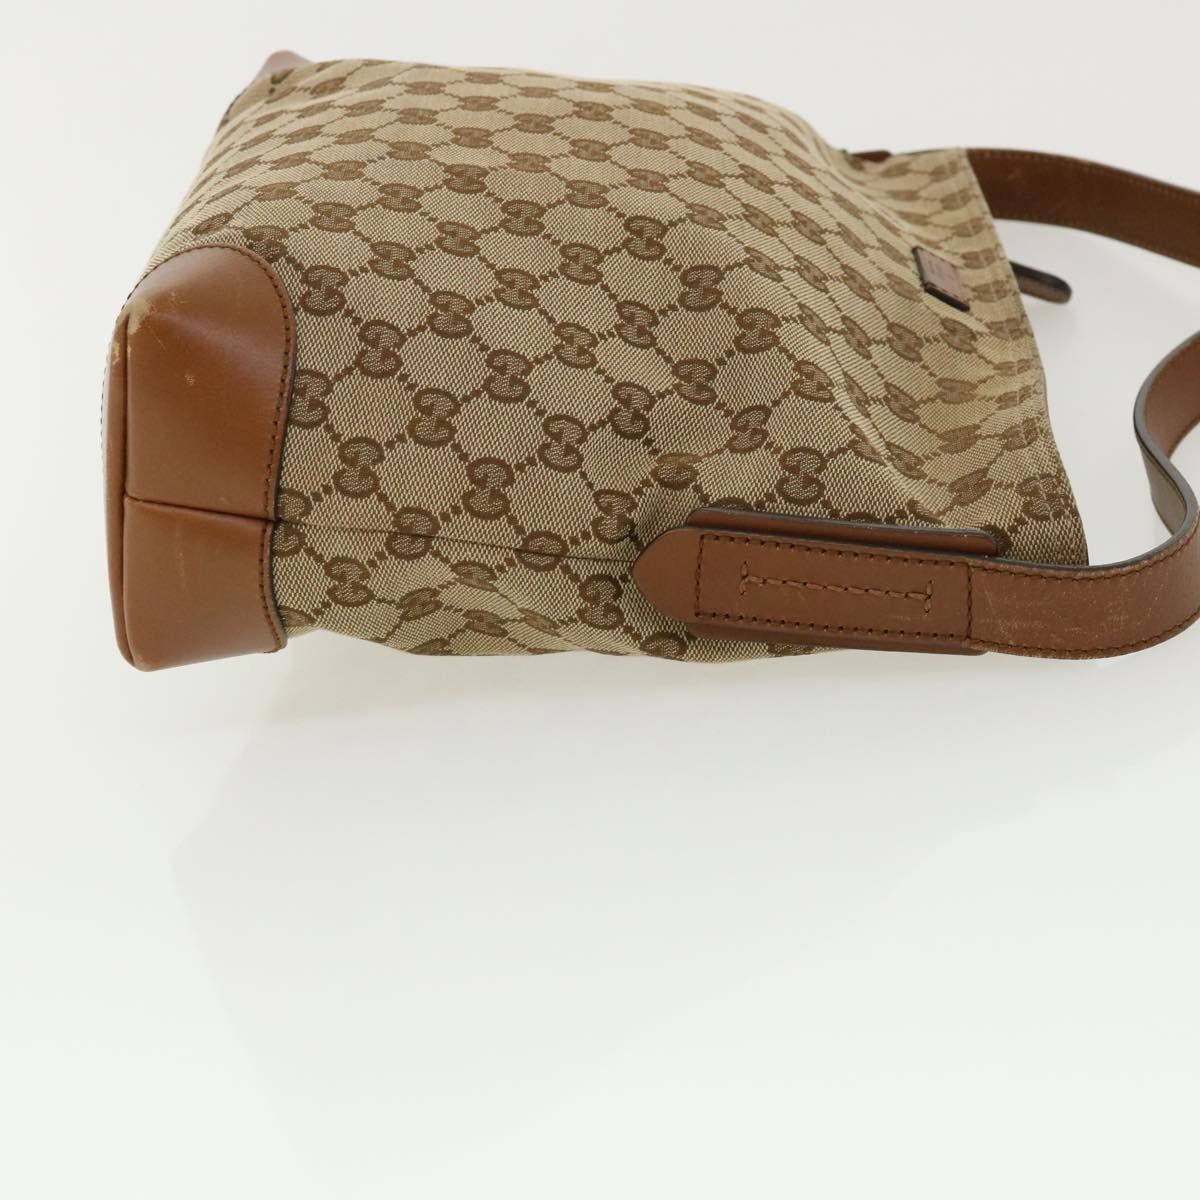 GUCCI Web Sherry Line GG Canvas Shoulder Bag Beige Brown Green 337598 Auth ep701